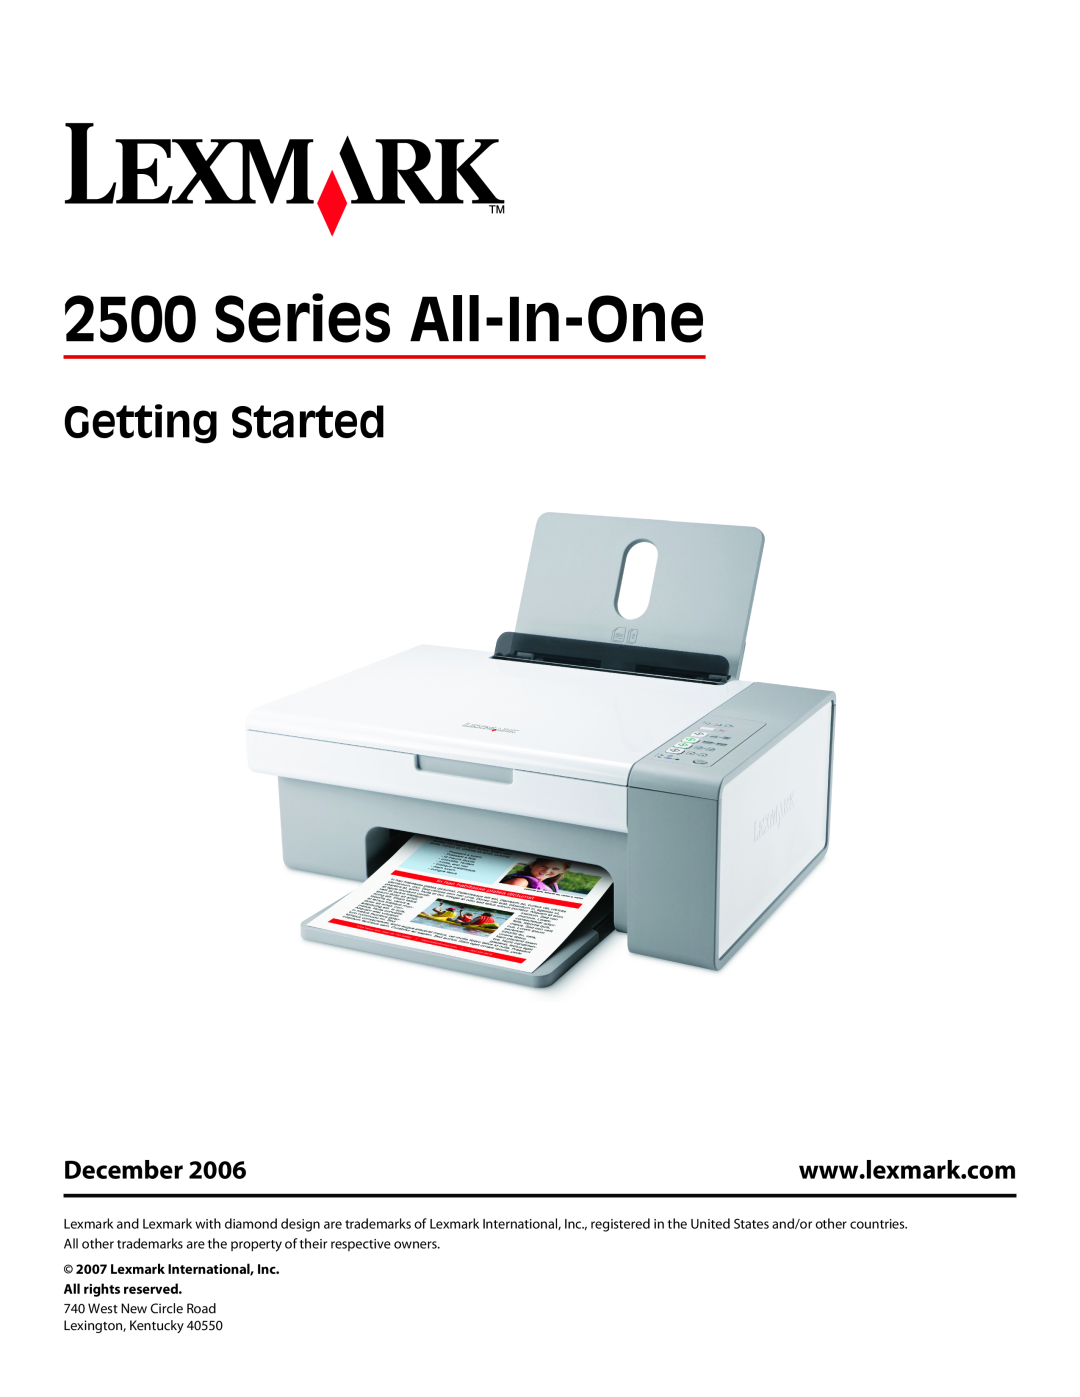 Lexmark 2500 Series manual Series All-In-One, Getting Started, December, Lexmark International, Inc. All rights reserved 